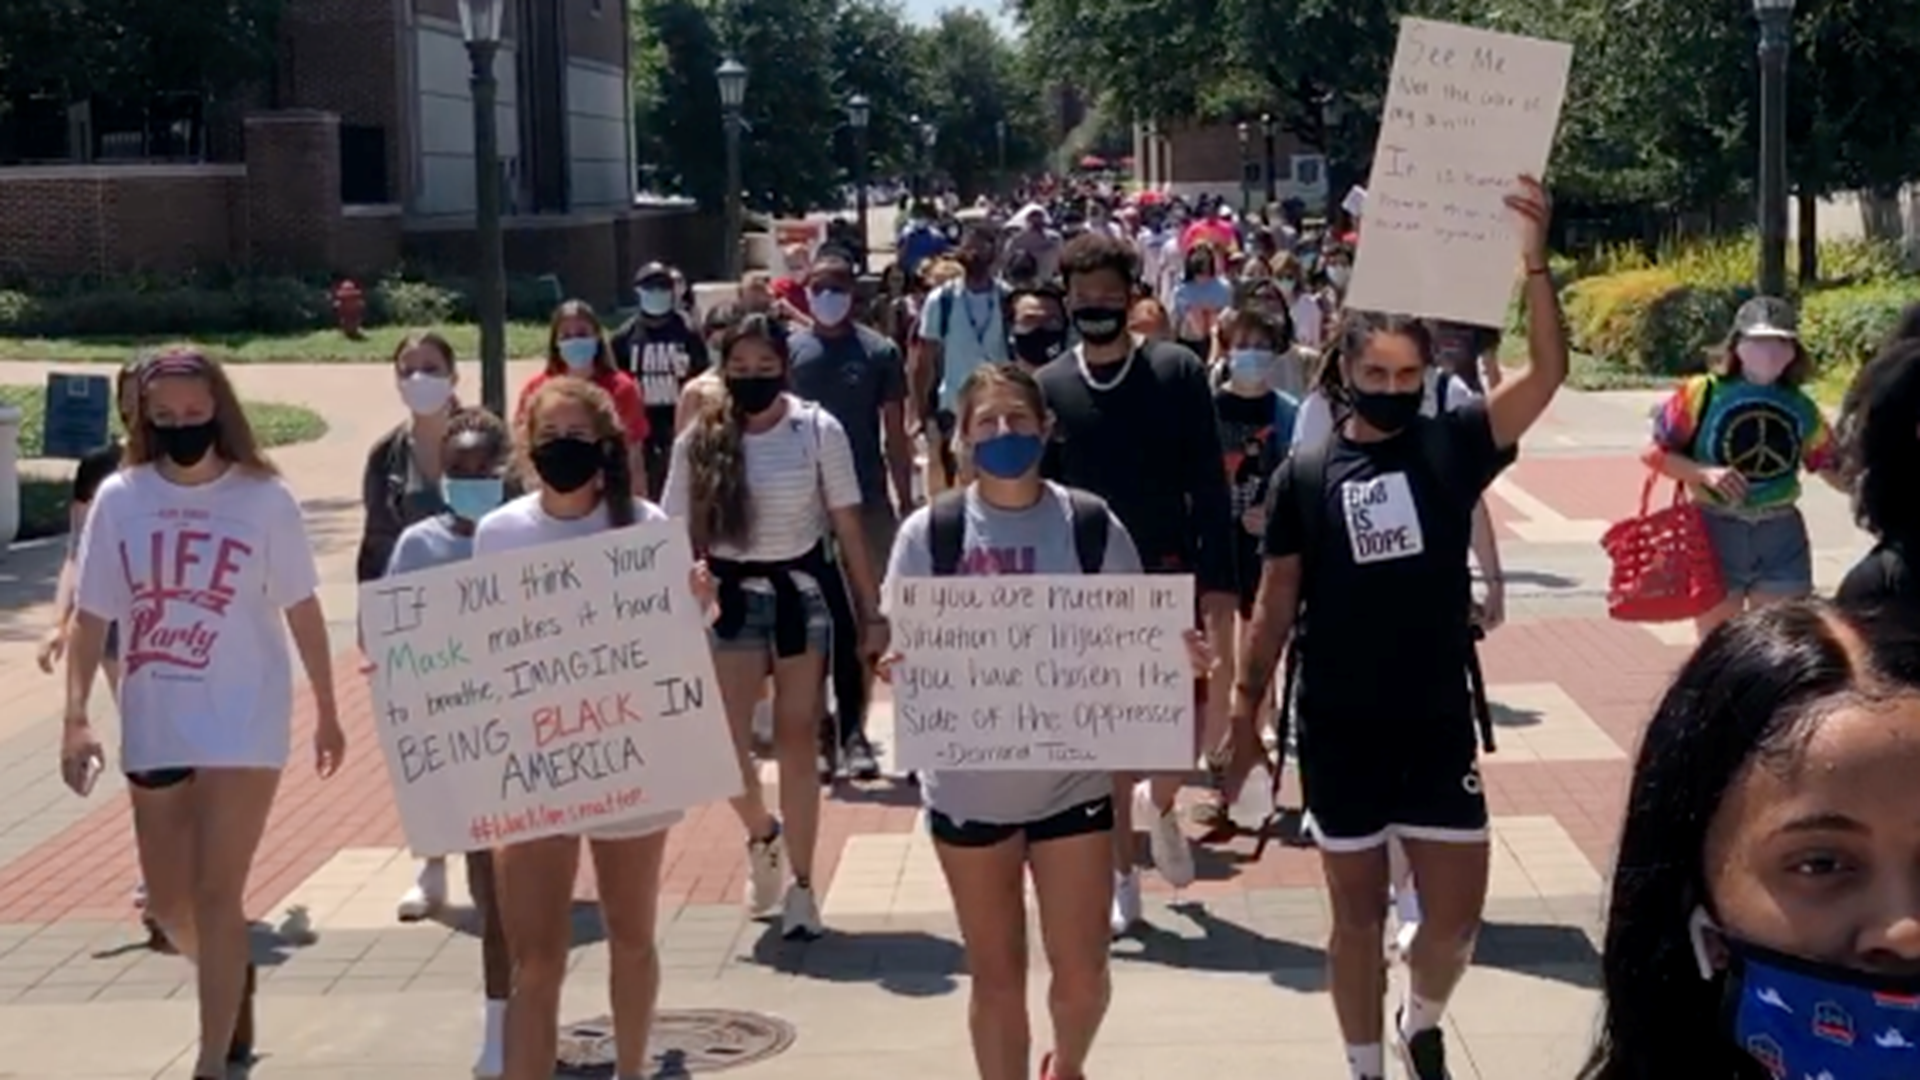 "At SMU, where the privilege is abundant, we need to make sure we're using our privilege for human rights messages," student Tyne Dickson said.